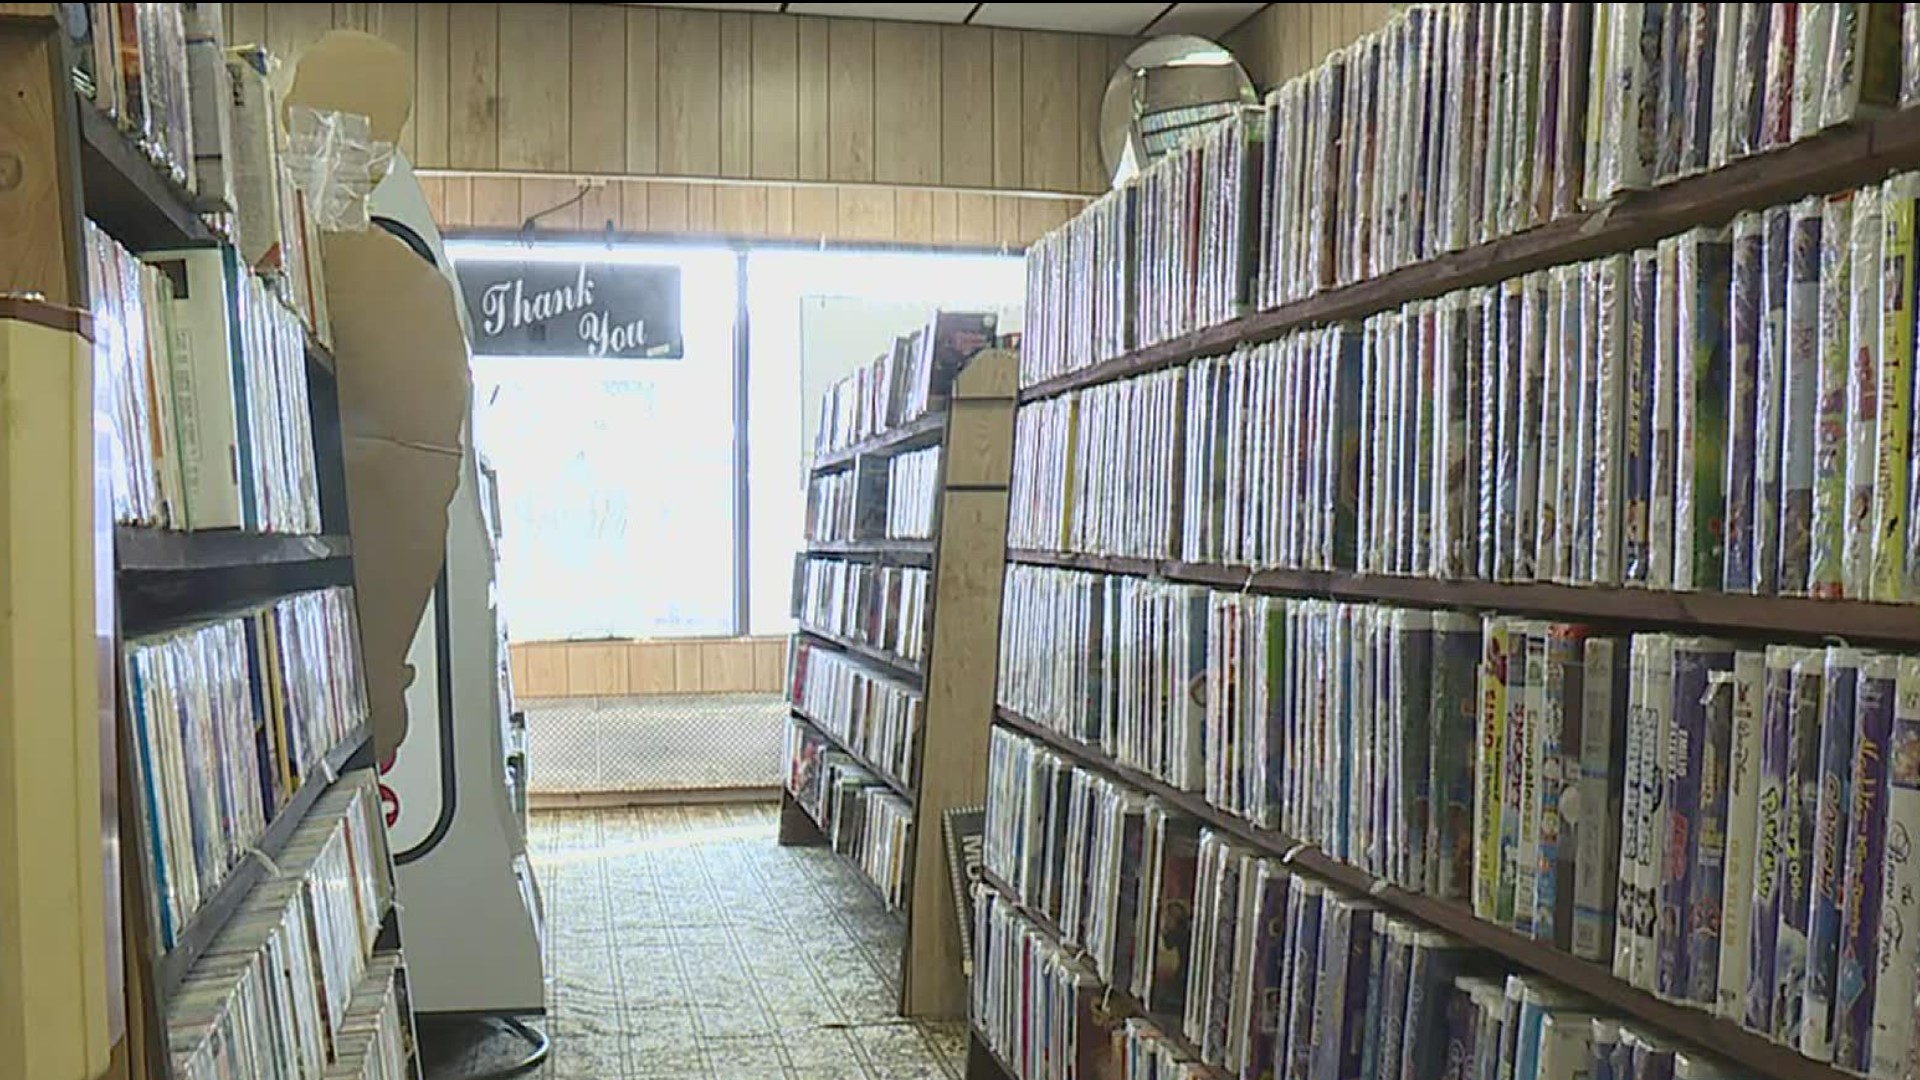 After decades in business, a couple from Luzerne County is retiring. Newswatch 16's Chelsea Strub shows us what they're leaving behind and what's for sale.